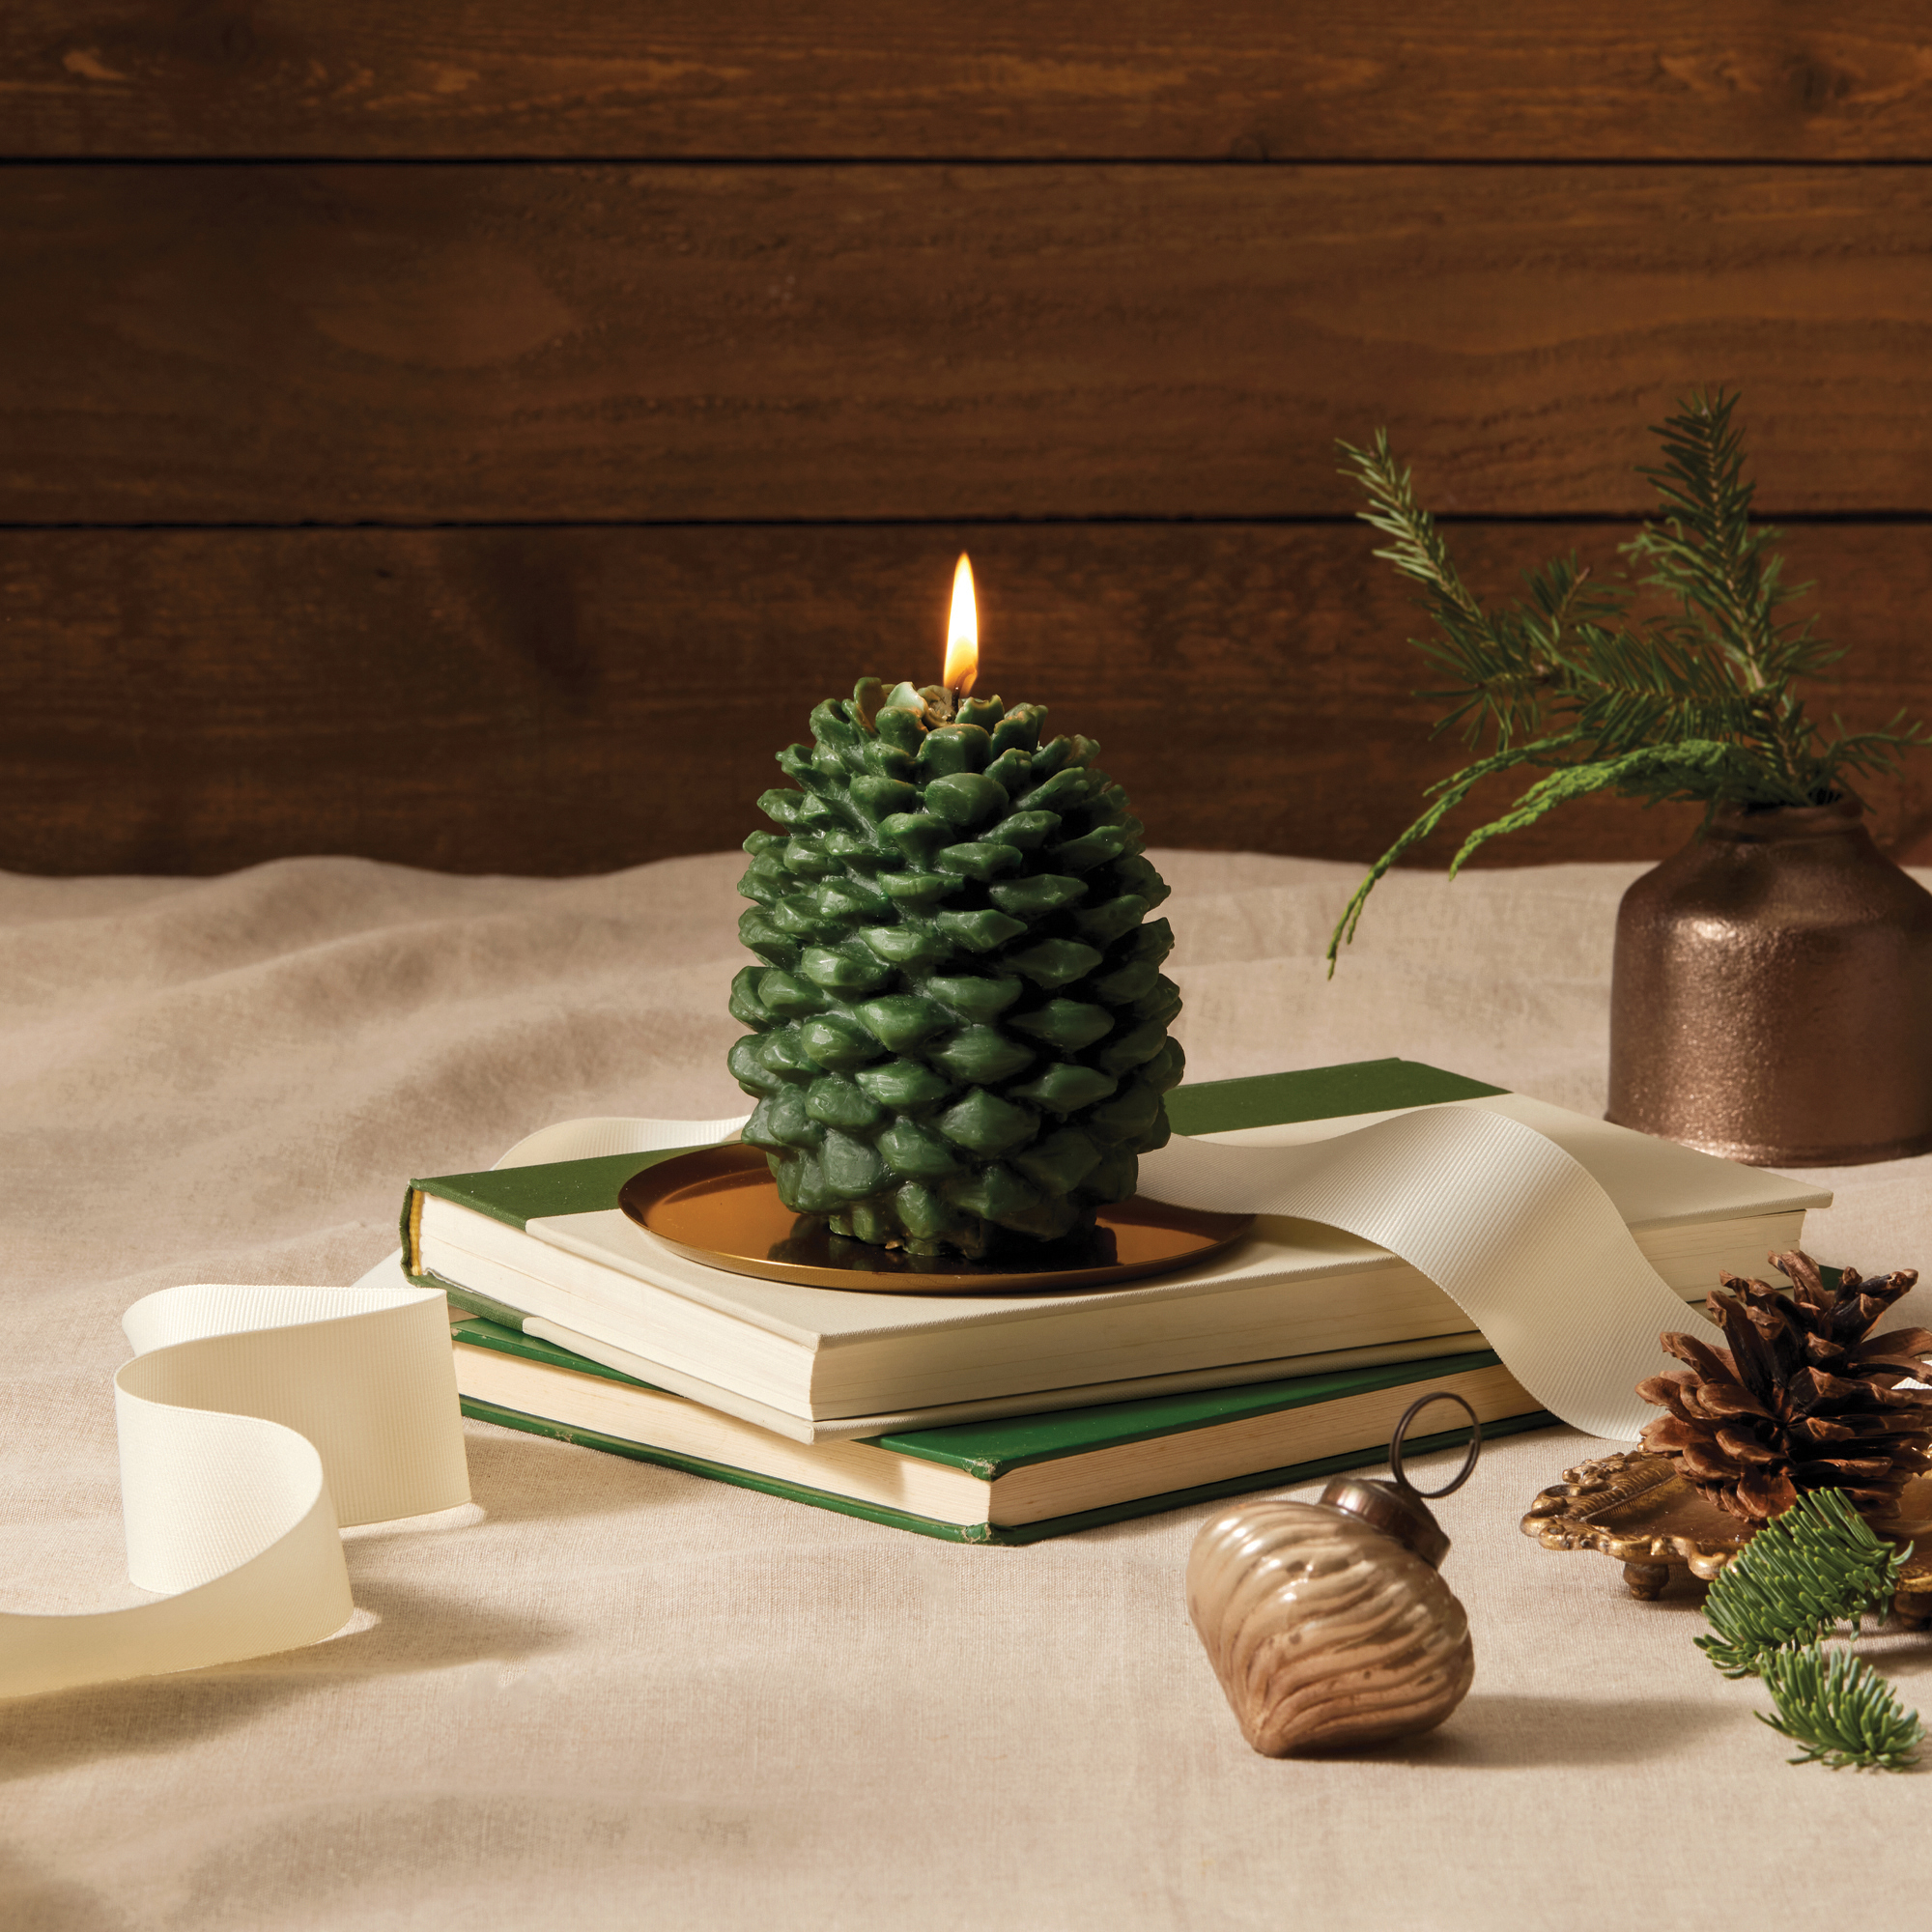 PINECONE CANDLE HOLDER, Place and Time Candle Holder, Pinecone